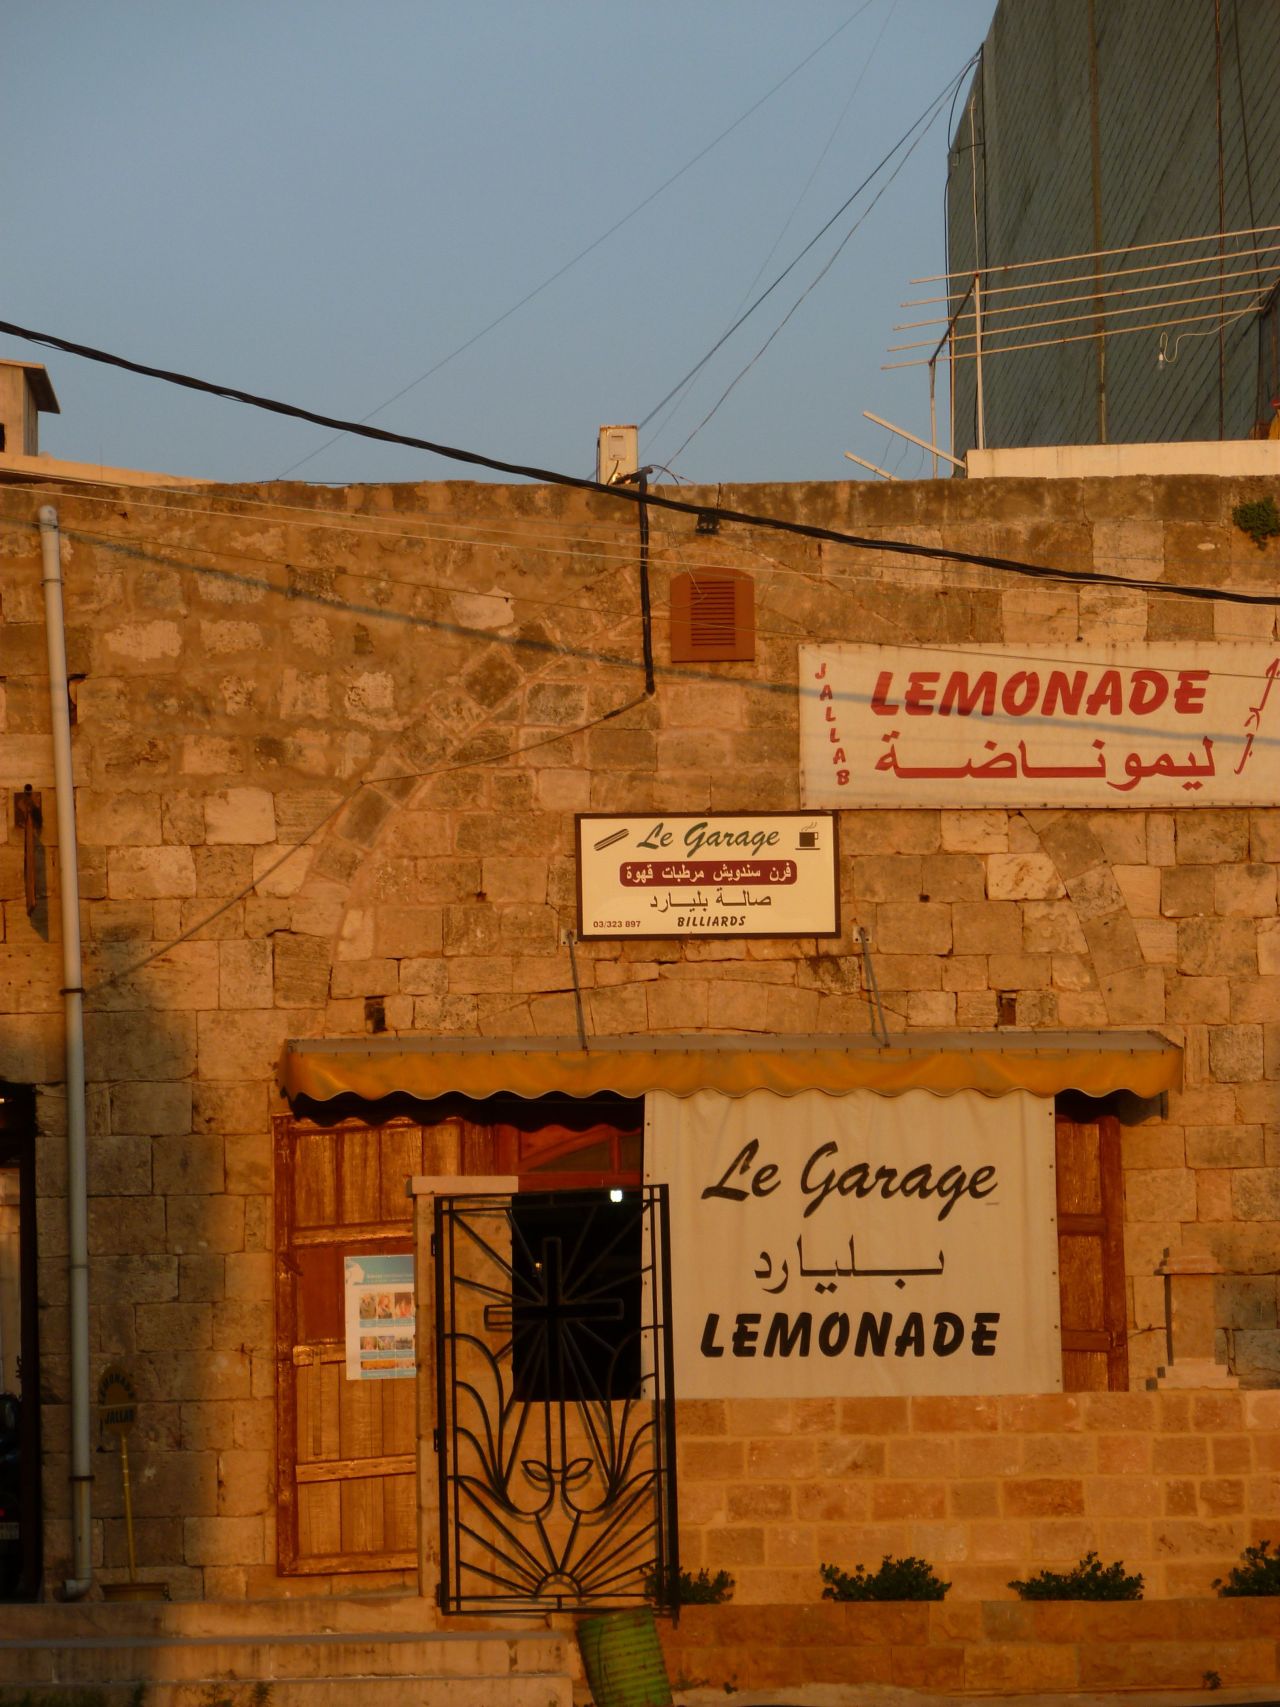 The Garage in Batroun offers the area's renowned sweet-and-tart lemonade, made from the local citrus harvest and served ice-cold.